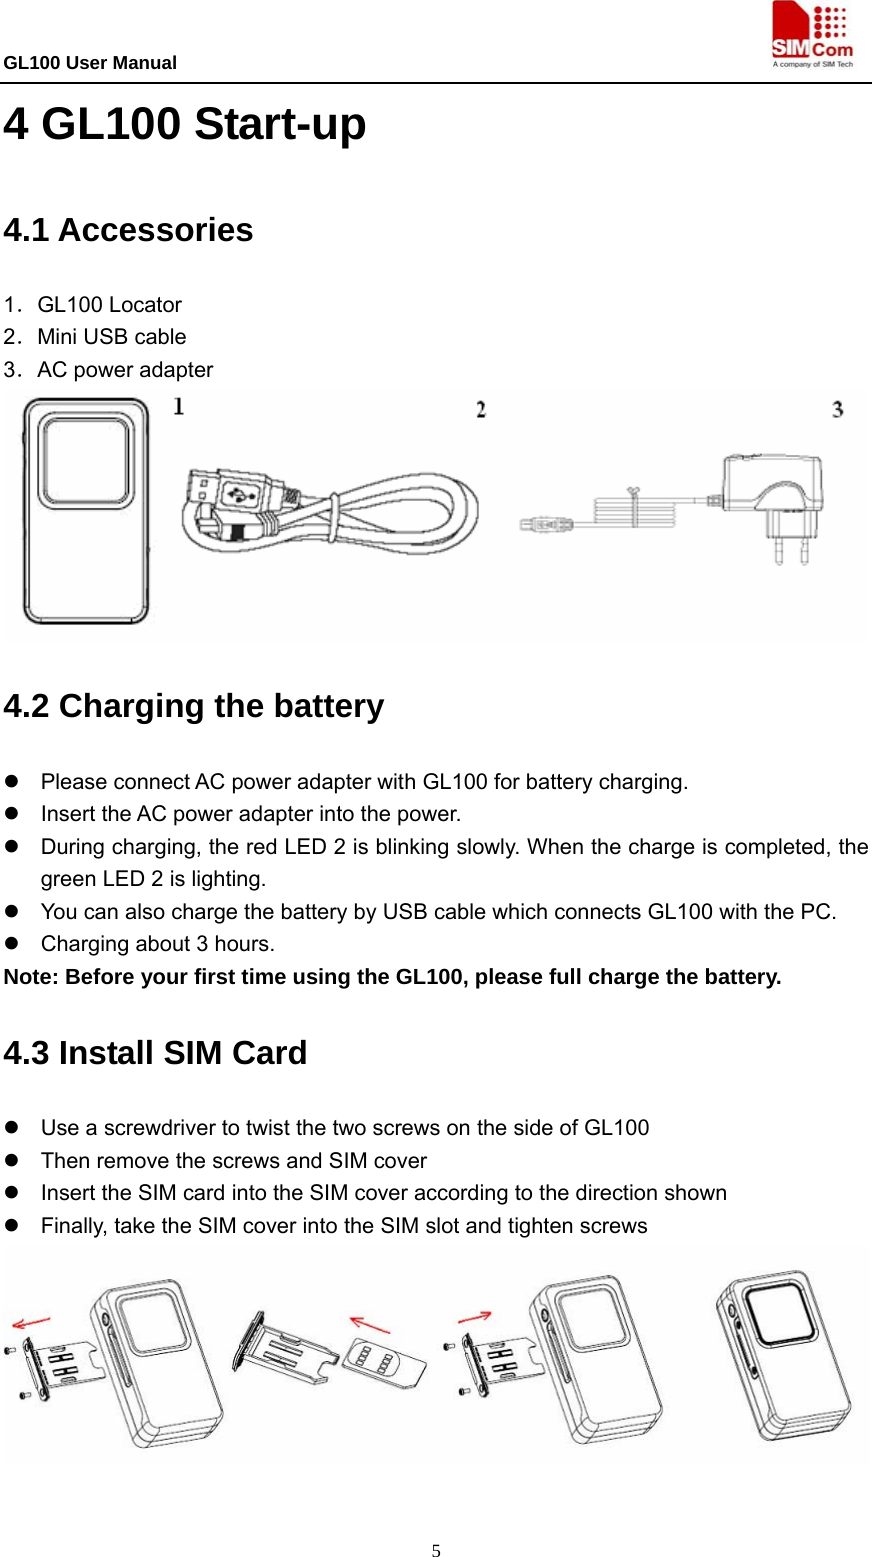 GL100 User Manual                                                                             5 4 GL100 Start-up 4.1 Accessories 1．GL100 Locator 2．Mini USB cable 3．AC power adapter  4.2 Charging the battery   z  Please connect AC power adapter with GL100 for battery charging. z  Insert the AC power adapter into the power.   z  During charging, the red LED 2 is blinking slowly. When the charge is completed, the green LED 2 is lighting.   z  You can also charge the battery by USB cable which connects GL100 with the PC. z  Charging about 3 hours. Note: Before your first time using the GL100, please full charge the battery. 4.3 Install SIM Card   z  Use a screwdriver to twist the two screws on the side of GL100 z  Then remove the screws and SIM cover z  Insert the SIM card into the SIM cover according to the direction shown z  Finally, take the SIM cover into the SIM slot and tighten screws     